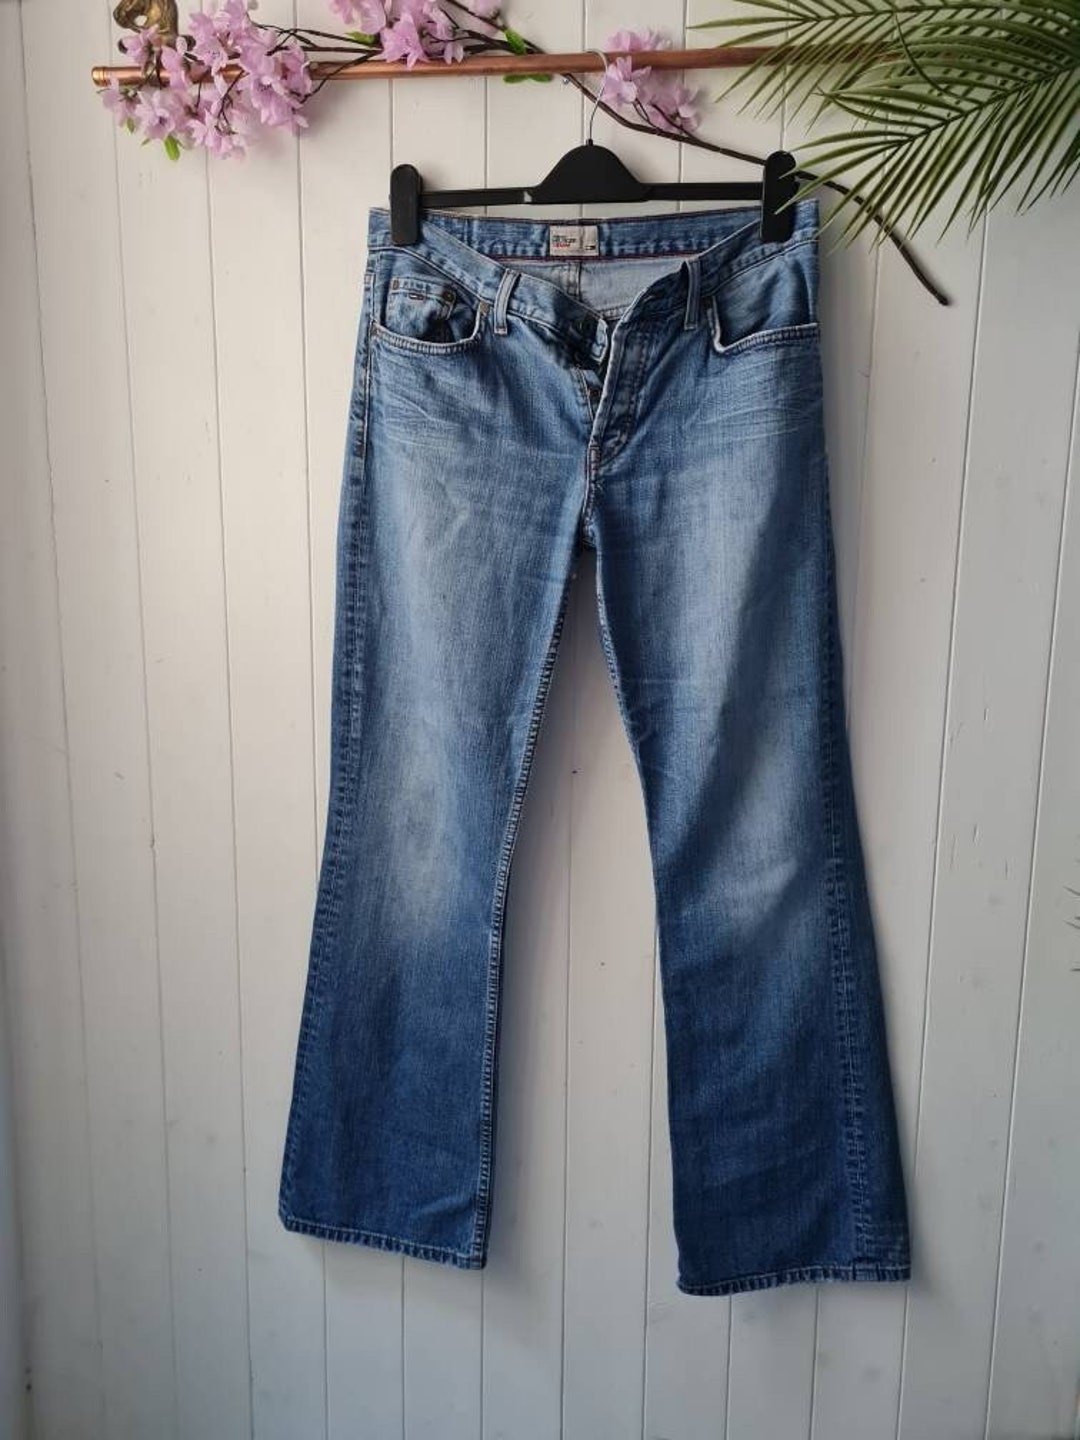 Vintage Jeans, Tommy Hilfiger, Low Rise, Boot Cut, Faded, Stonewashed  Jeans, 90s Y2k Jeans, Retro Boho Hippy, Cool Jeans - Etsy